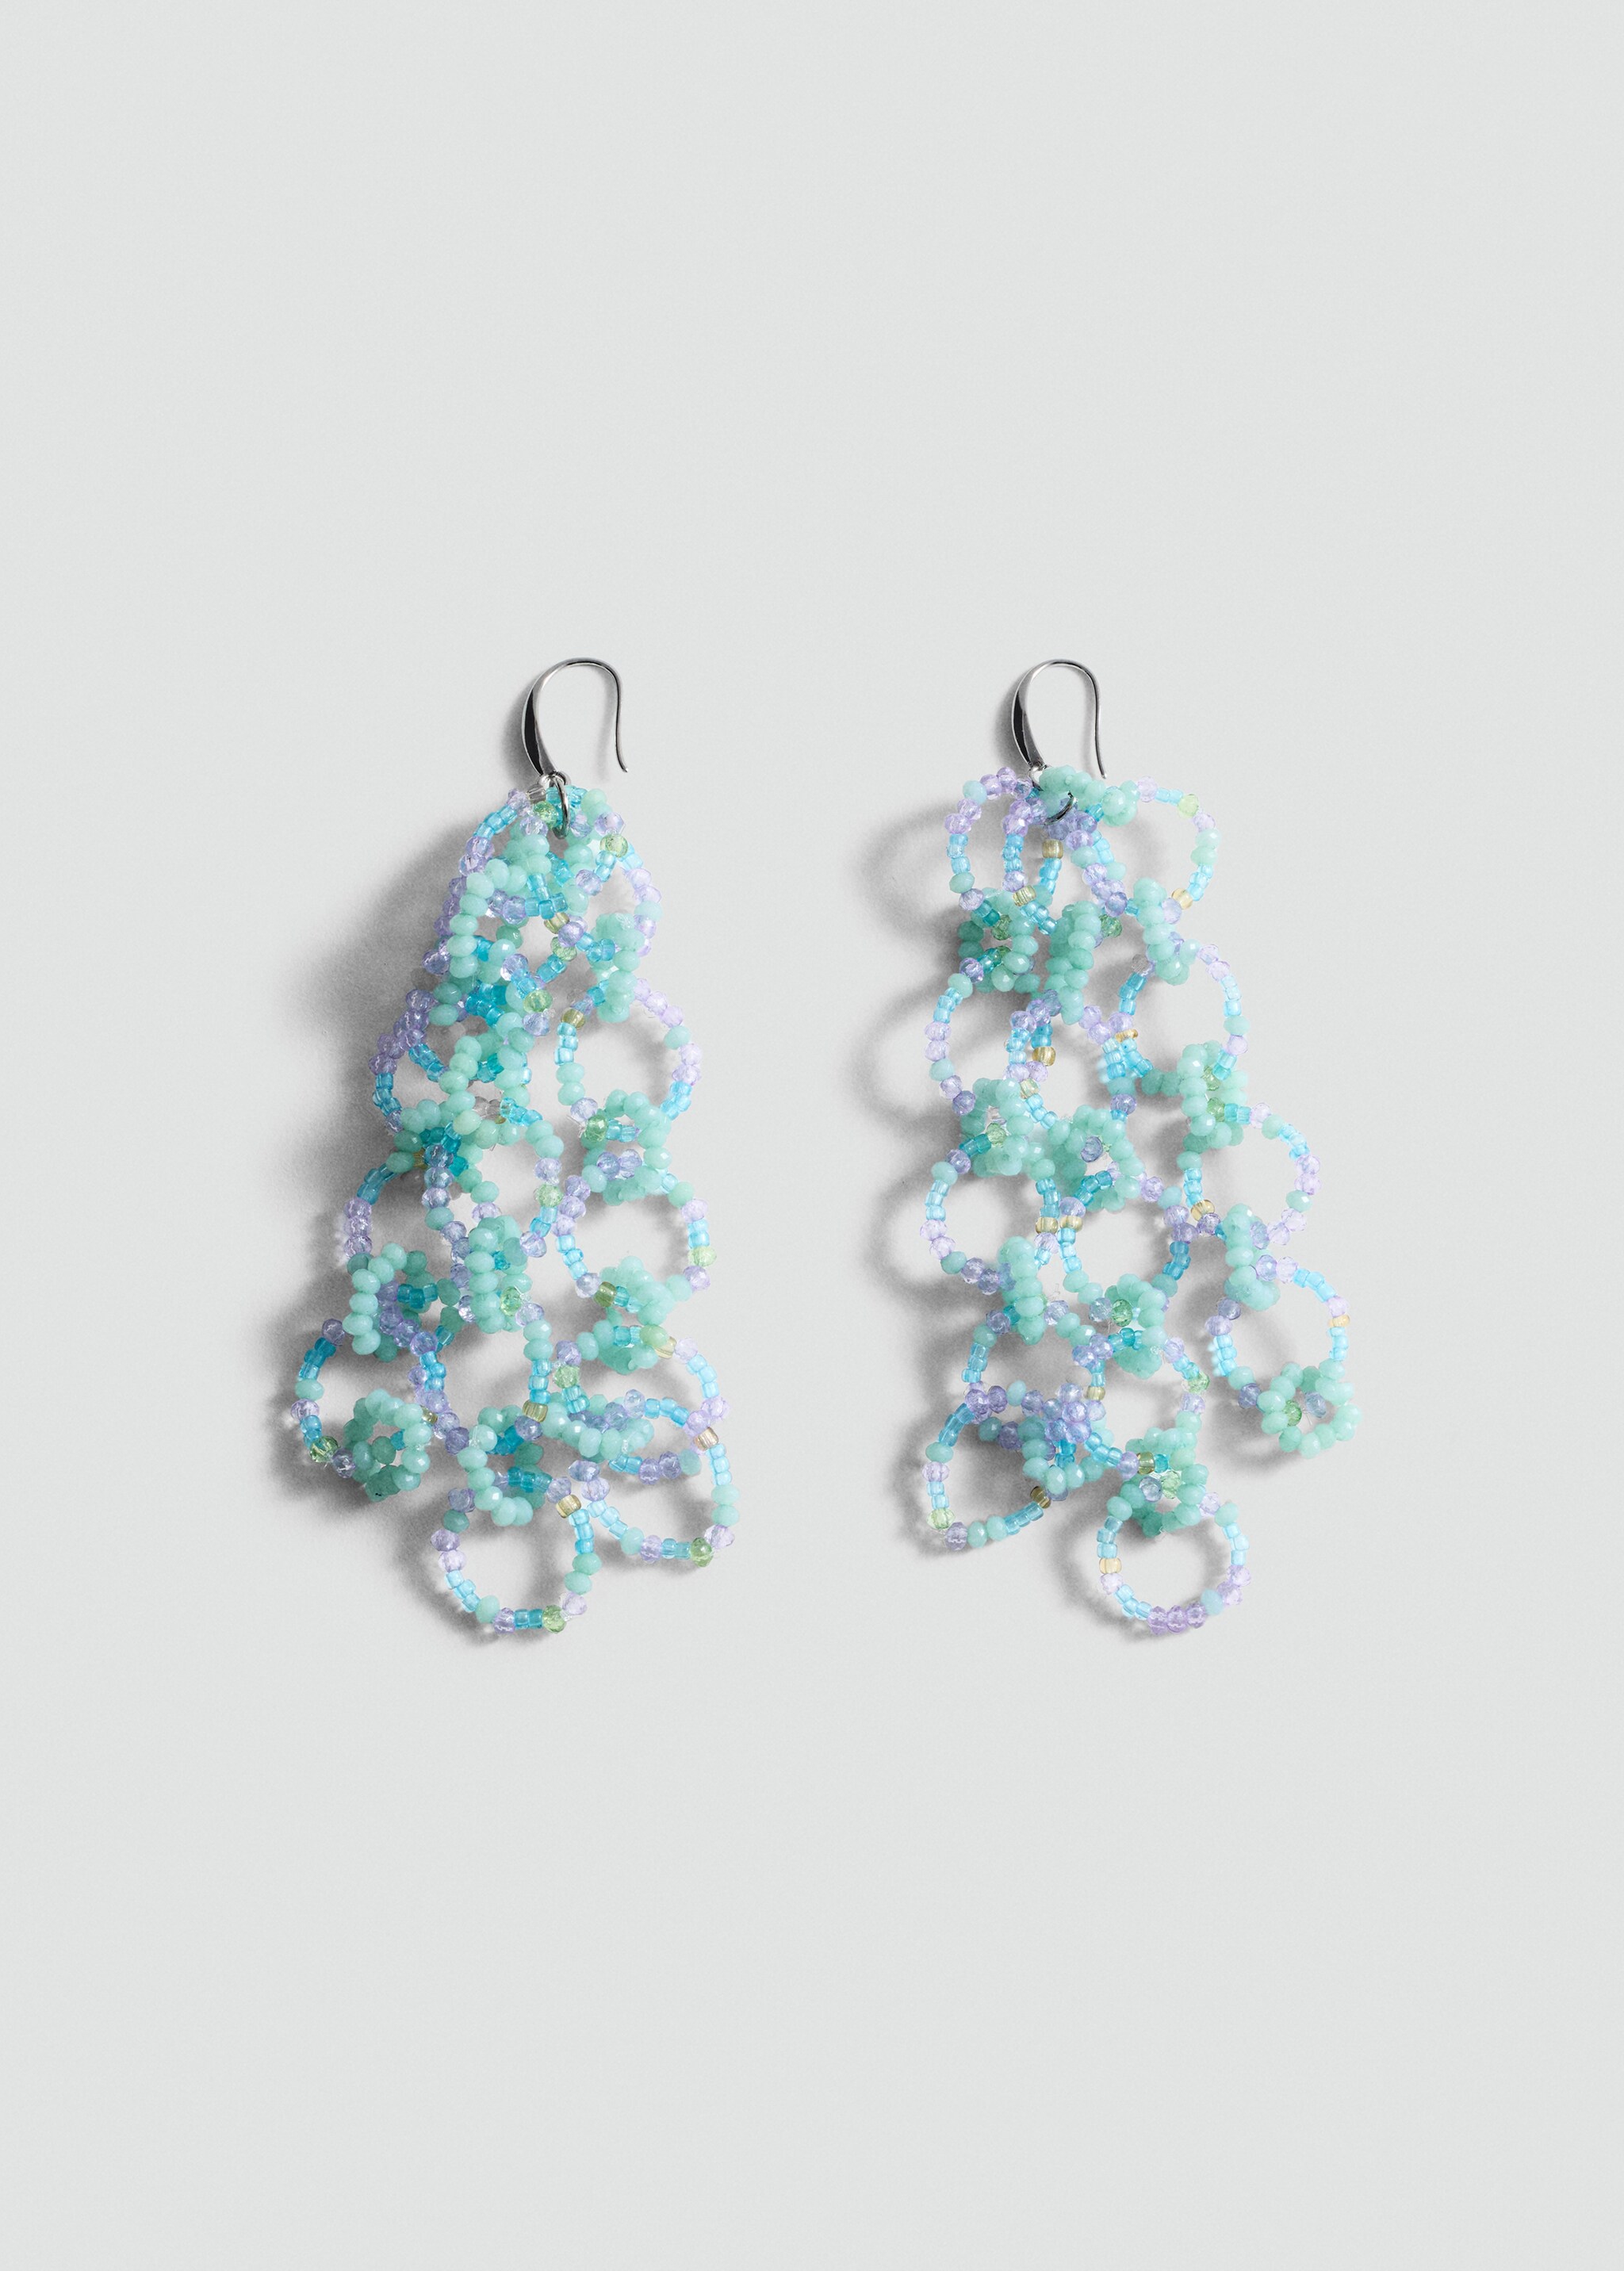 Beaded pendant earrings - Article without model